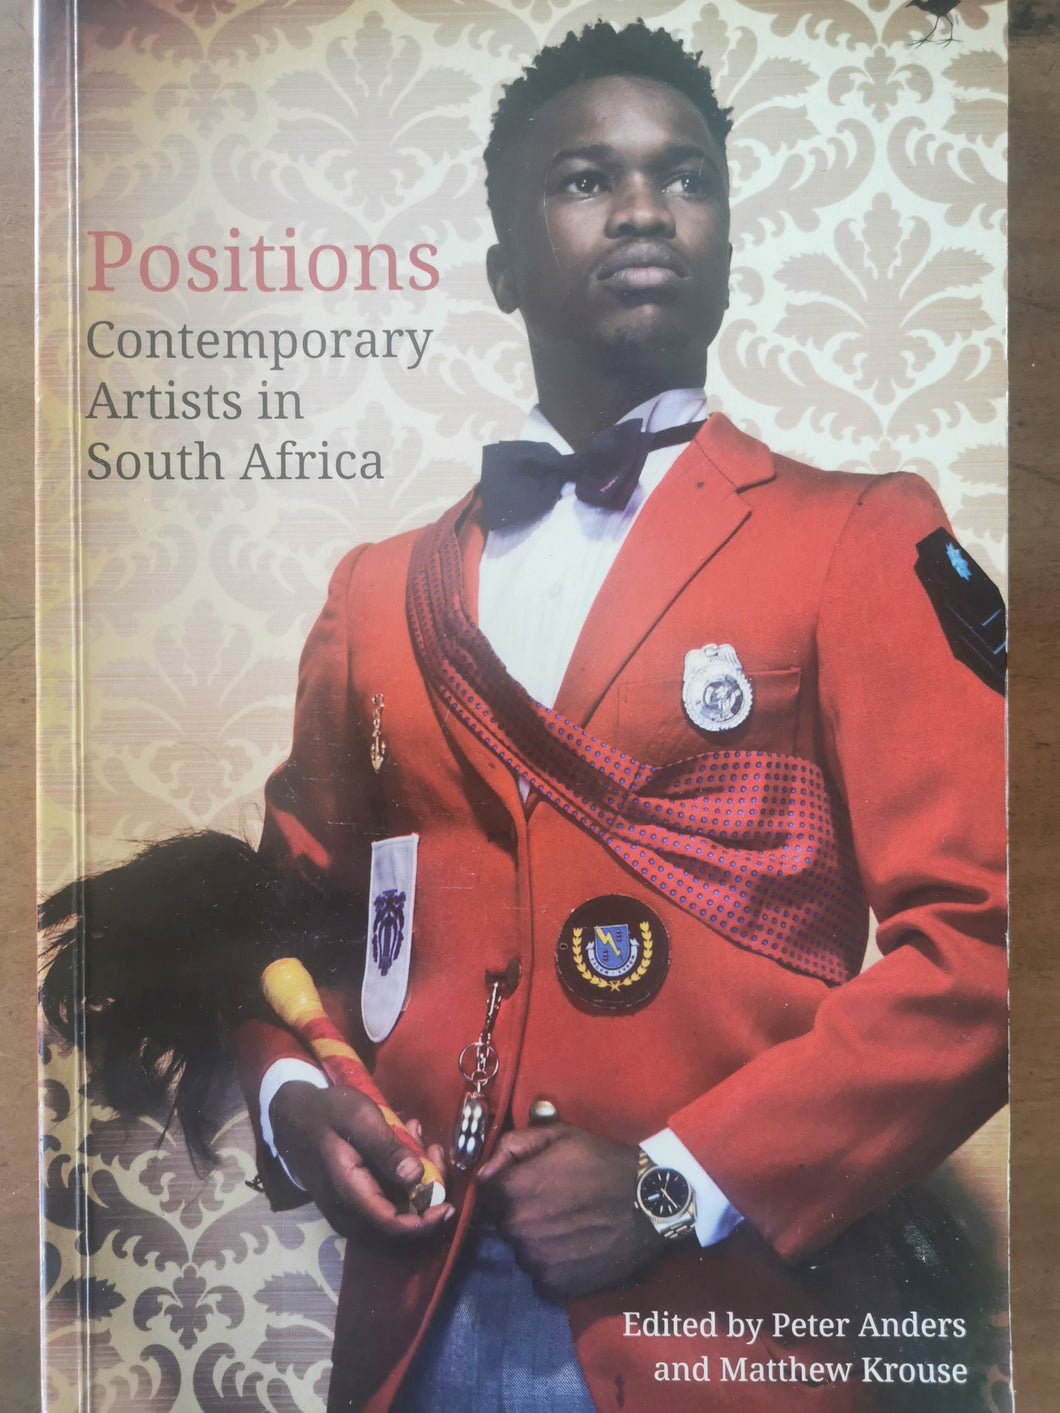 Positions: Contemporary Artists in South Africa - edited by Peter Anders and Matthew Krouse